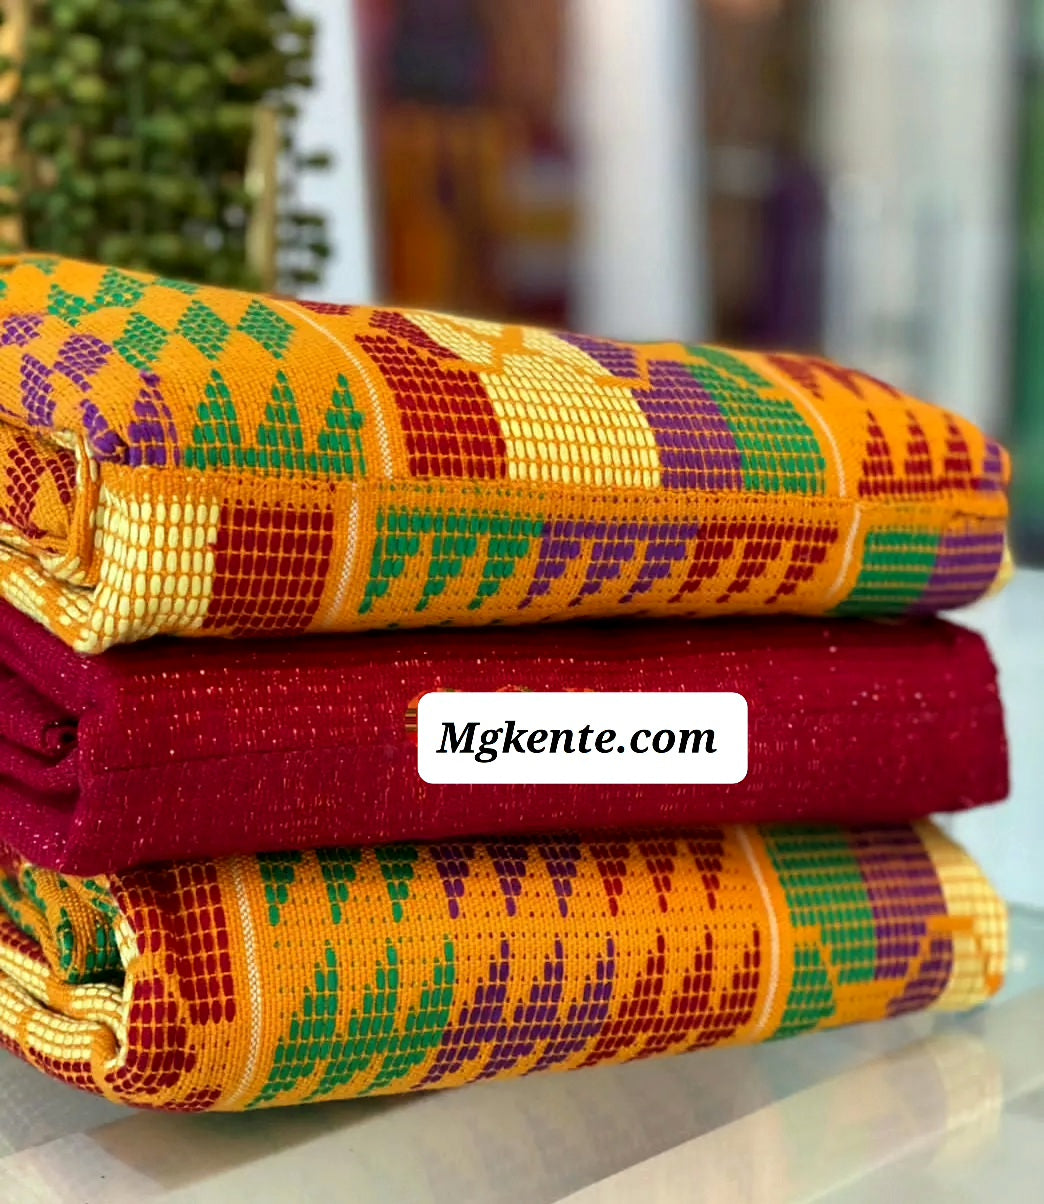 MG Authentic Hand Weaved Kente Cloth A2217